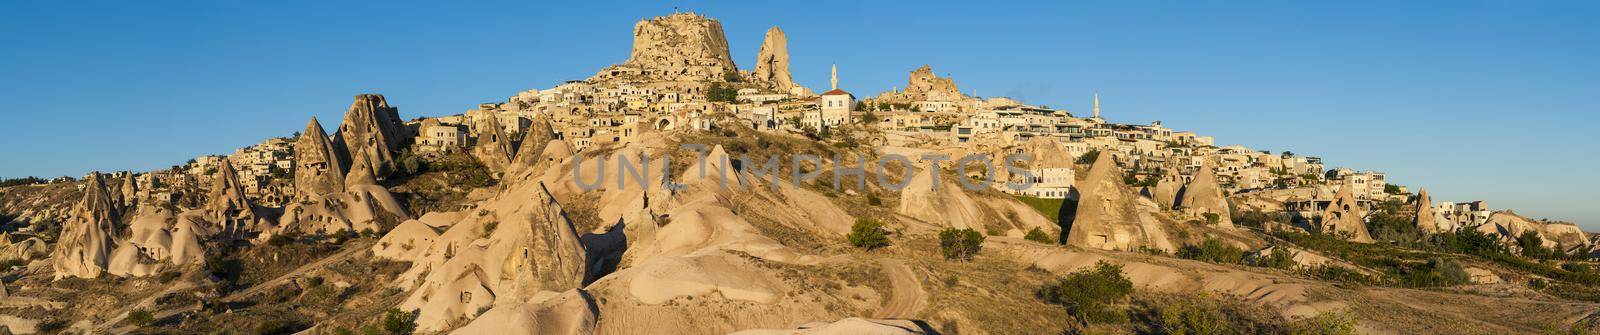 Ancient town and a castle of Uchisar dug from a mountains after sunrise, Cappadocia, Turkey.Panorama